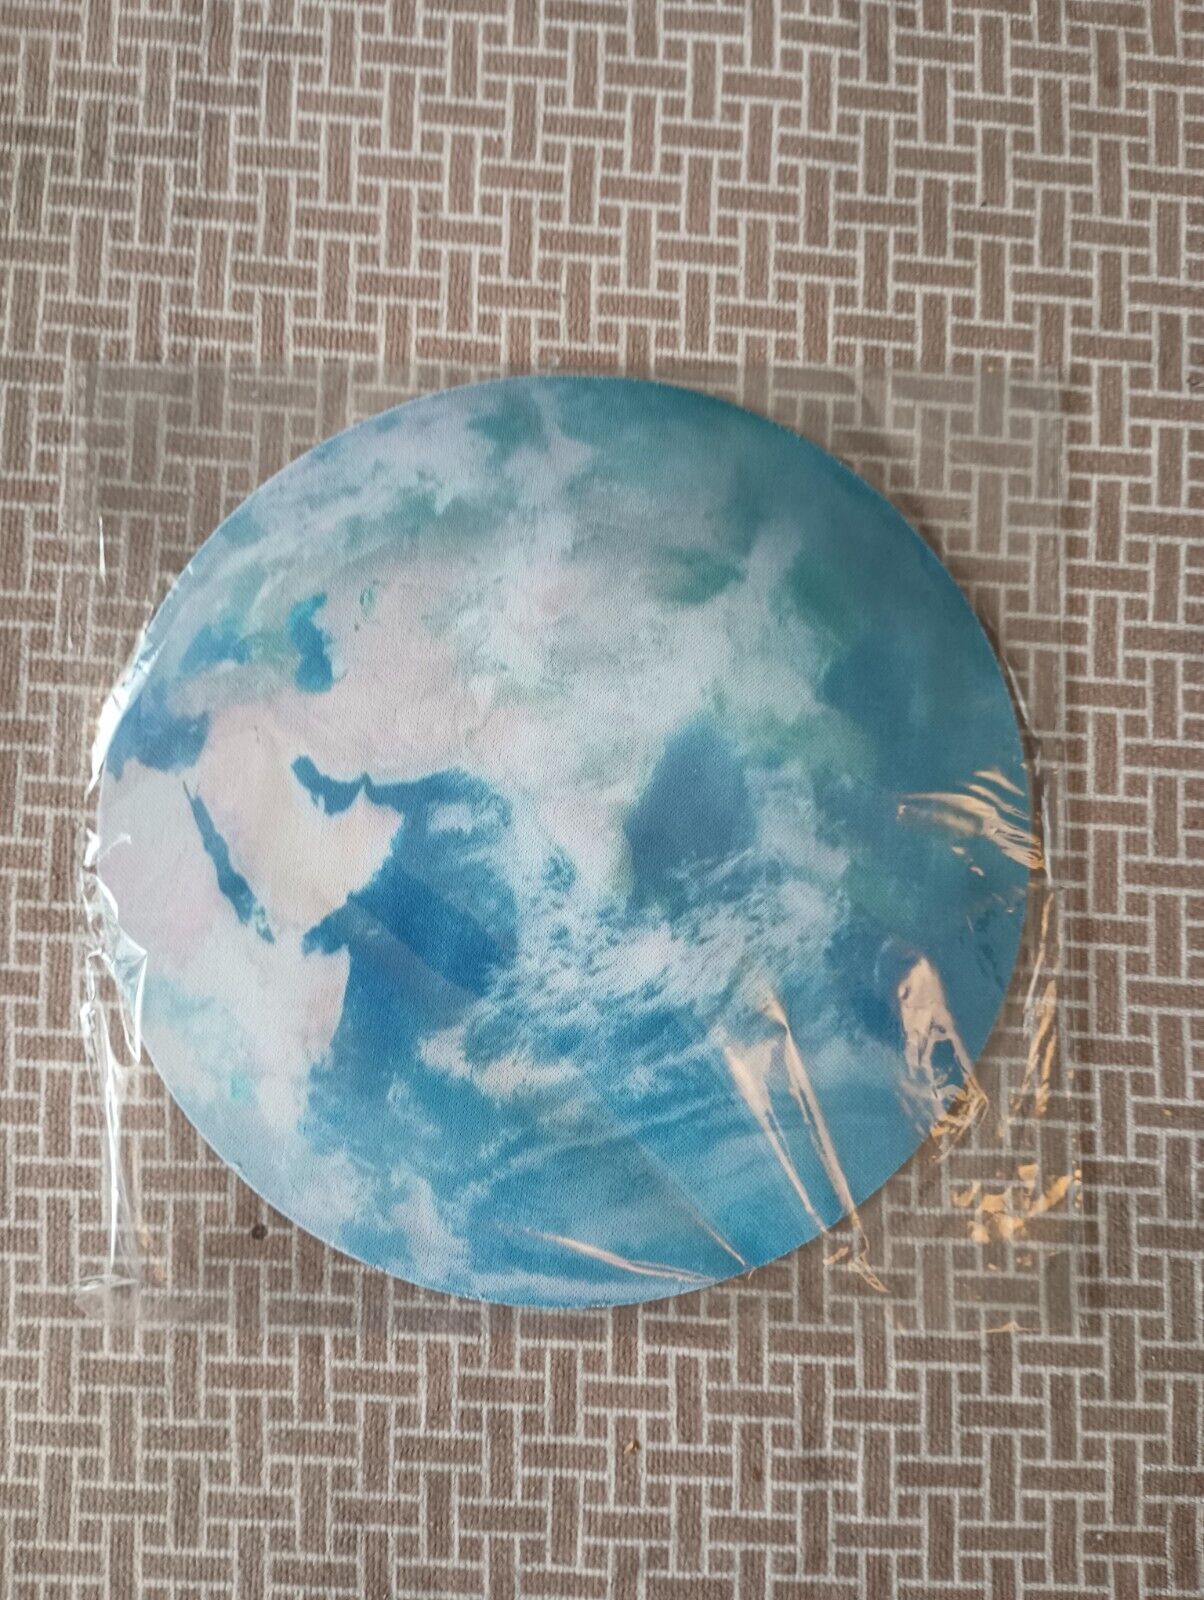 Round Earth Shaped Globe Mouse Pad.  Brand New